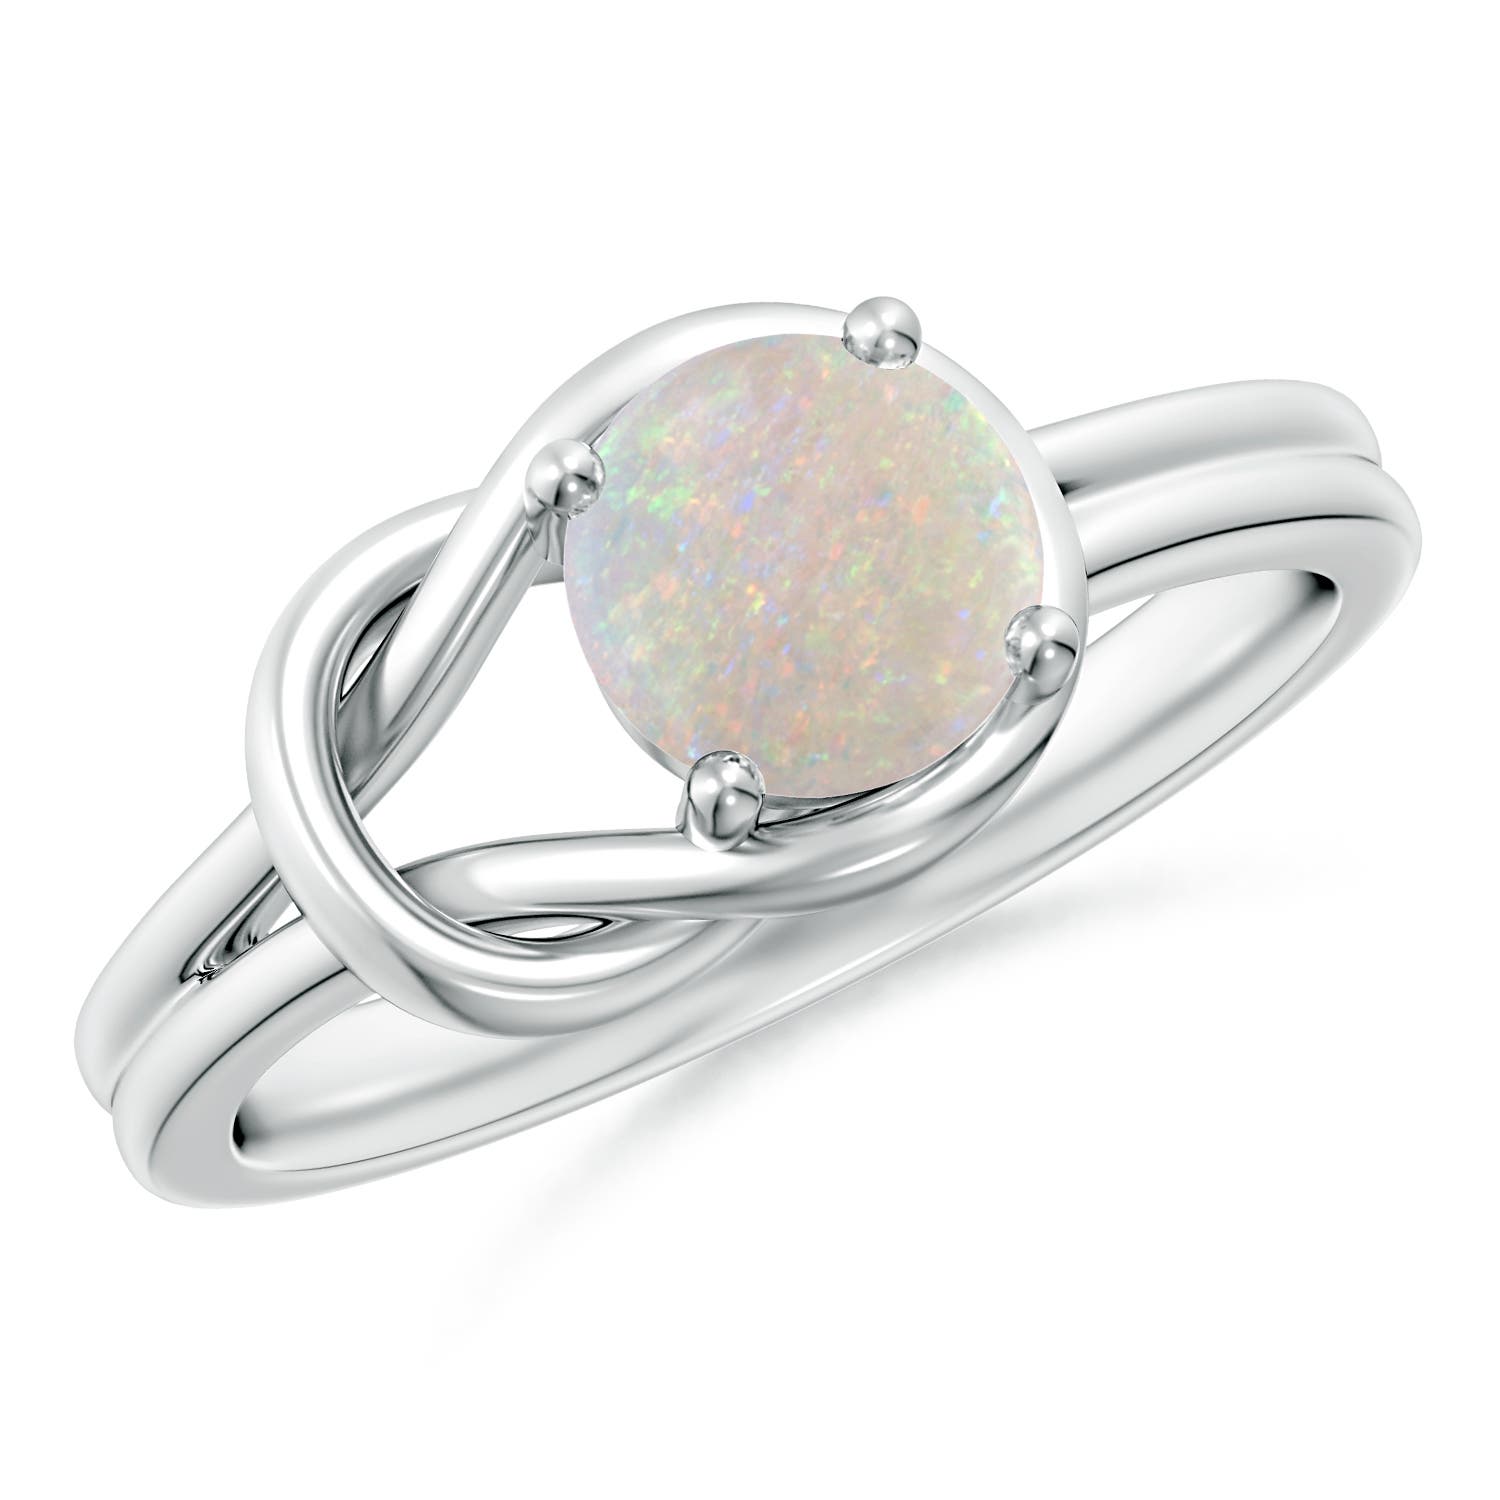 AA - Opal / 0.5 CT / 14 KT White Gold